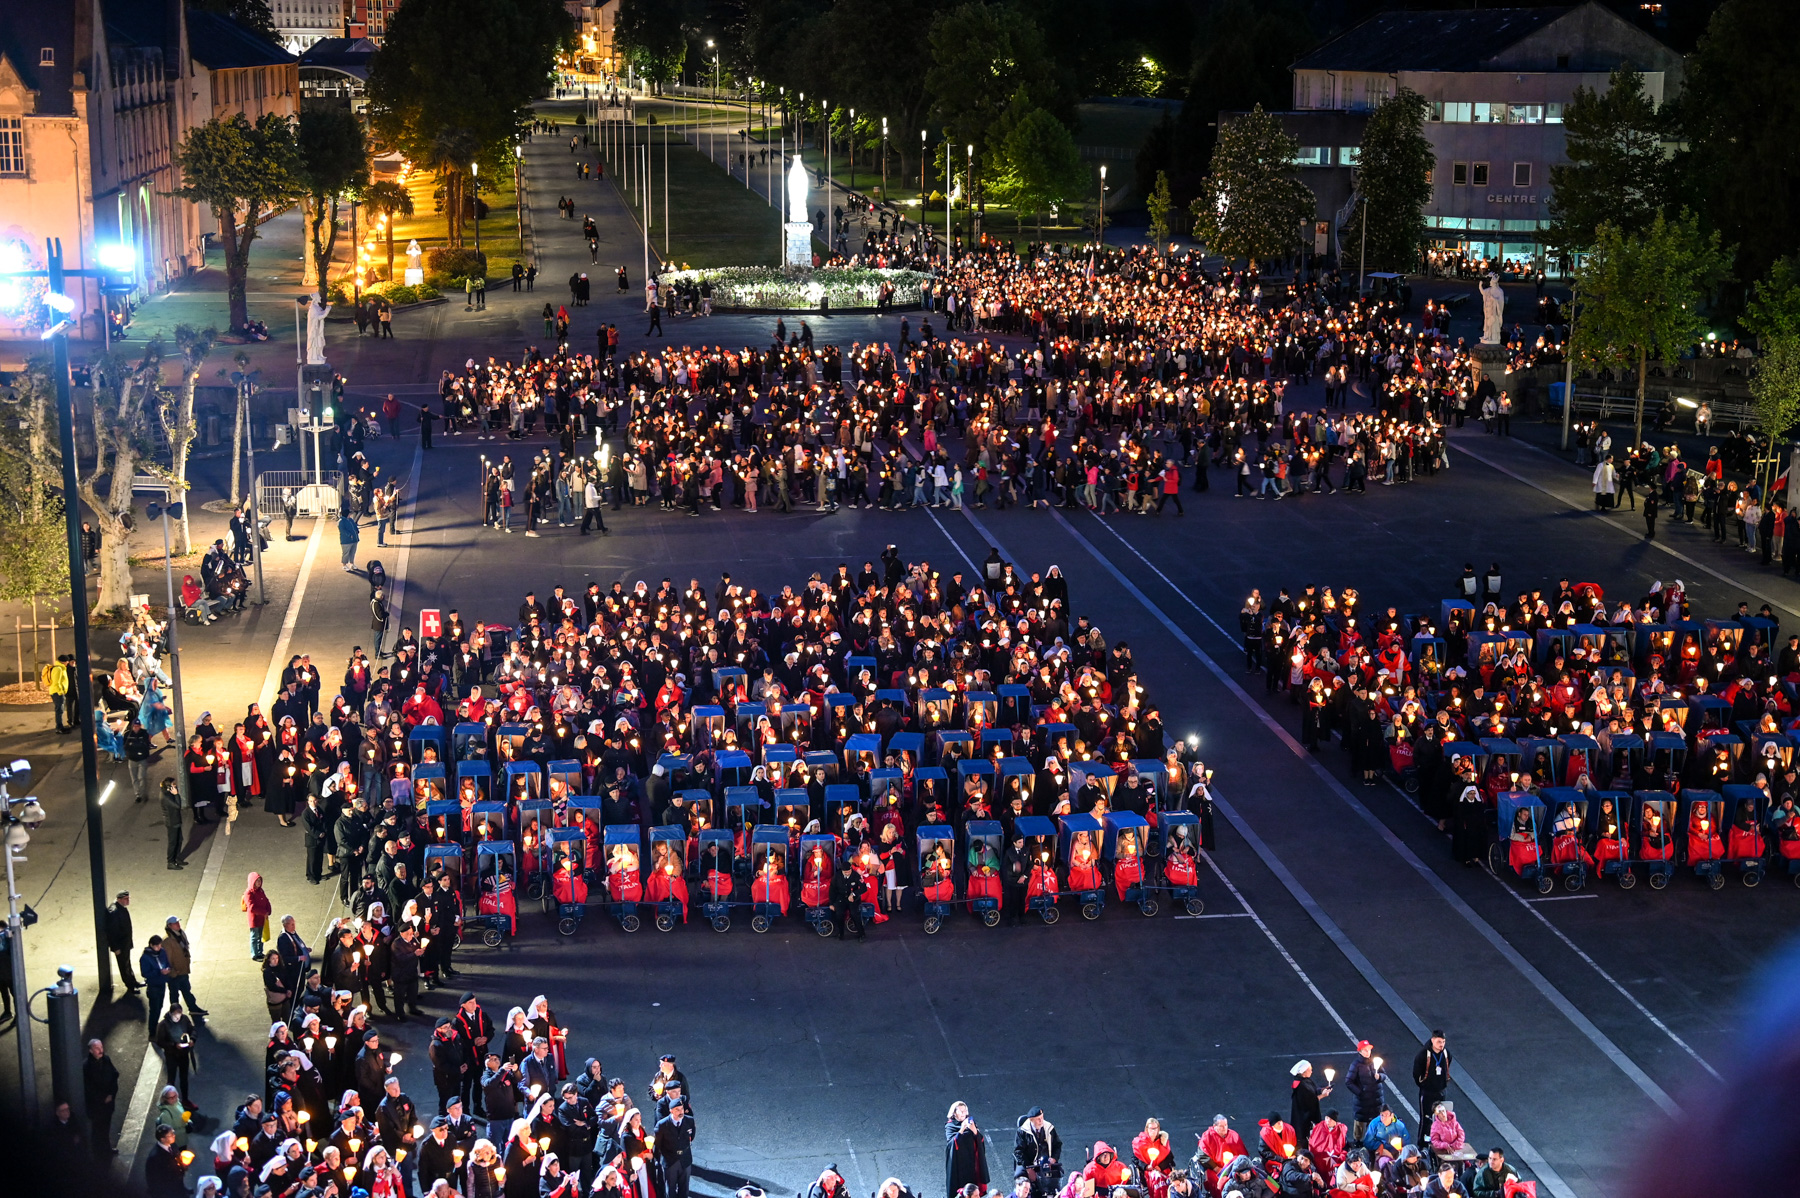 The streets of Lourdes flooded with the Order of Malta’s pilgrims’ uniforms